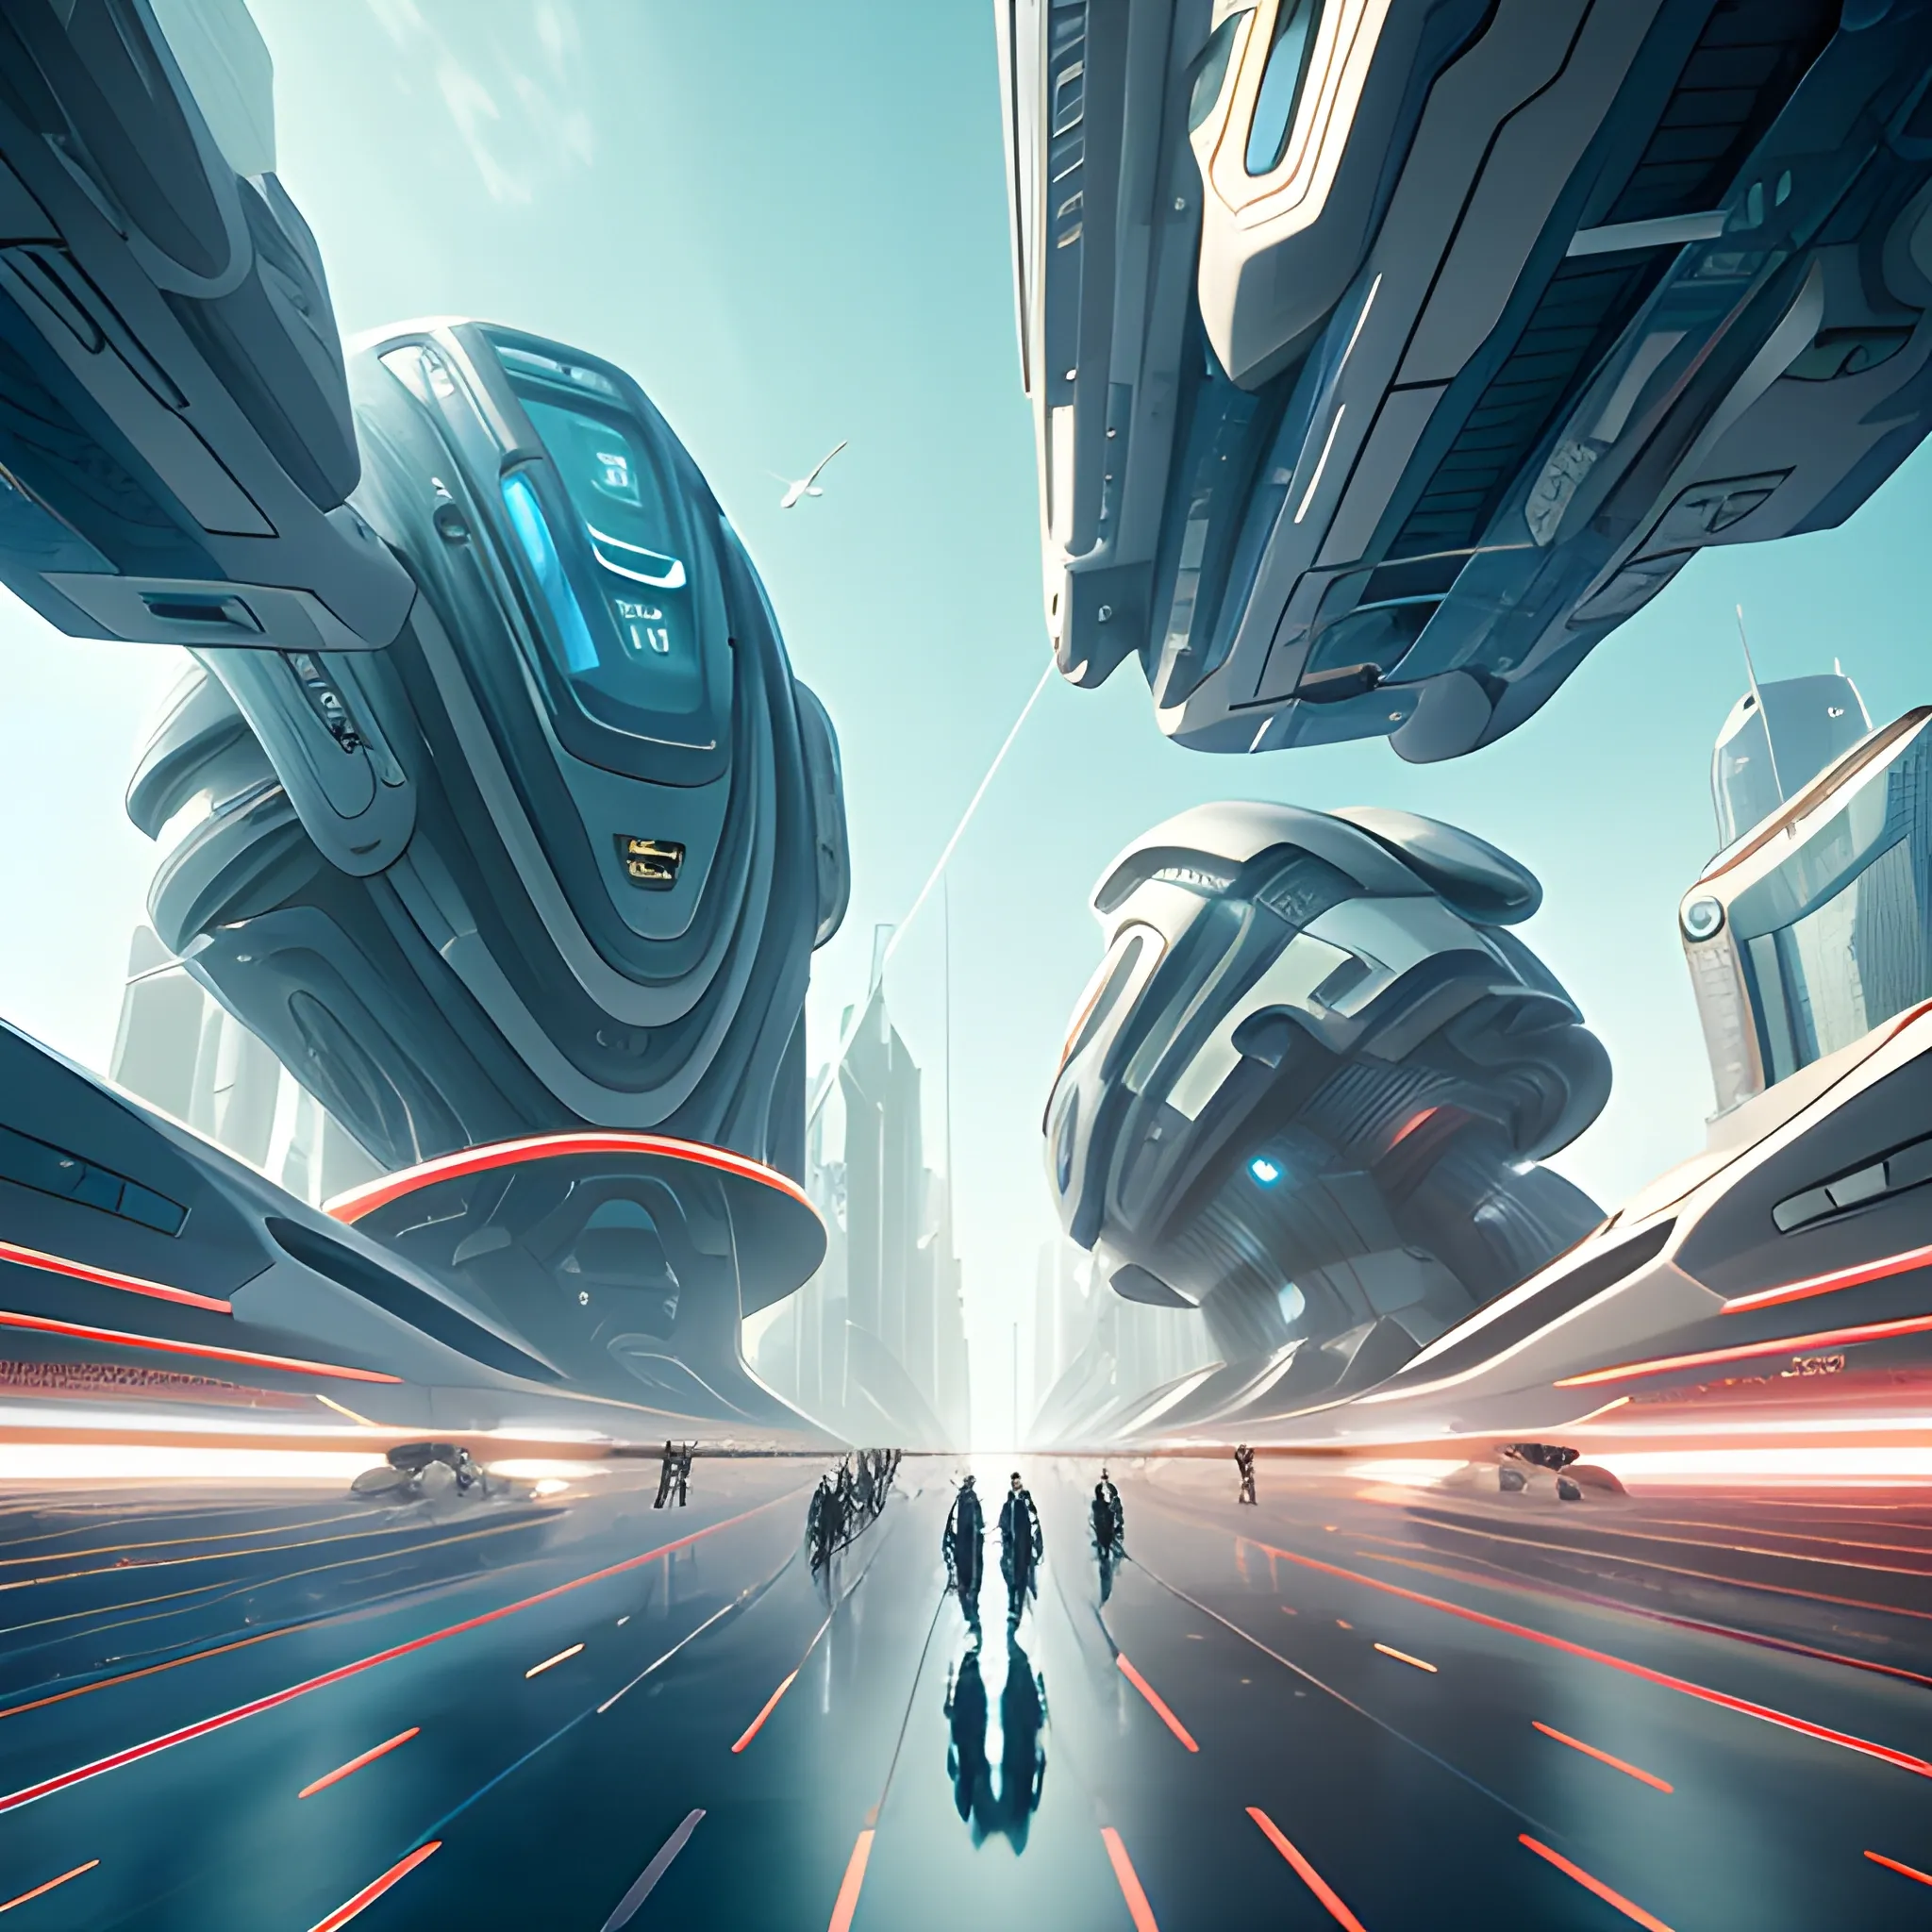 A futuristic cityscape in the year 3,000, with a diverse crowd of people and robots walking in front of a camera, to see their bodies and faces. The people are dressed in stylish high-tech attire, while the robots are of advanced humanoid design. The background shows imposing ultra-modern buildings with elegant curved designs and vibrant color schemes. Flying cars streak across the sky, adding dynamism to the scene. 3d render, cinematic., 3D